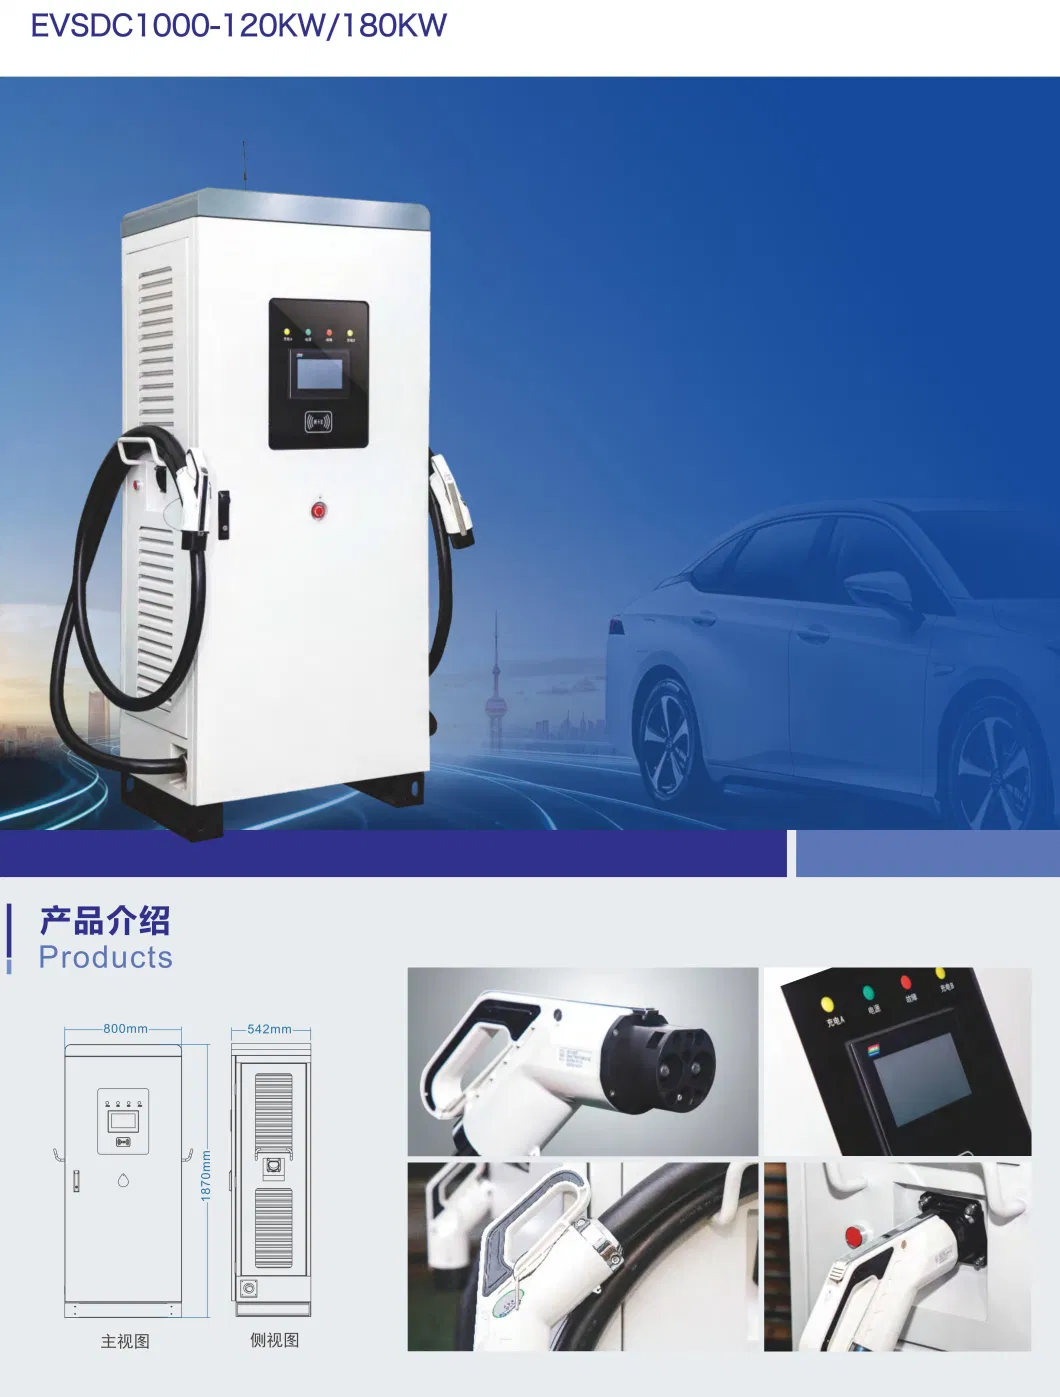 Fast DC EV Charger for 120kw Commercial Level 3 Charger